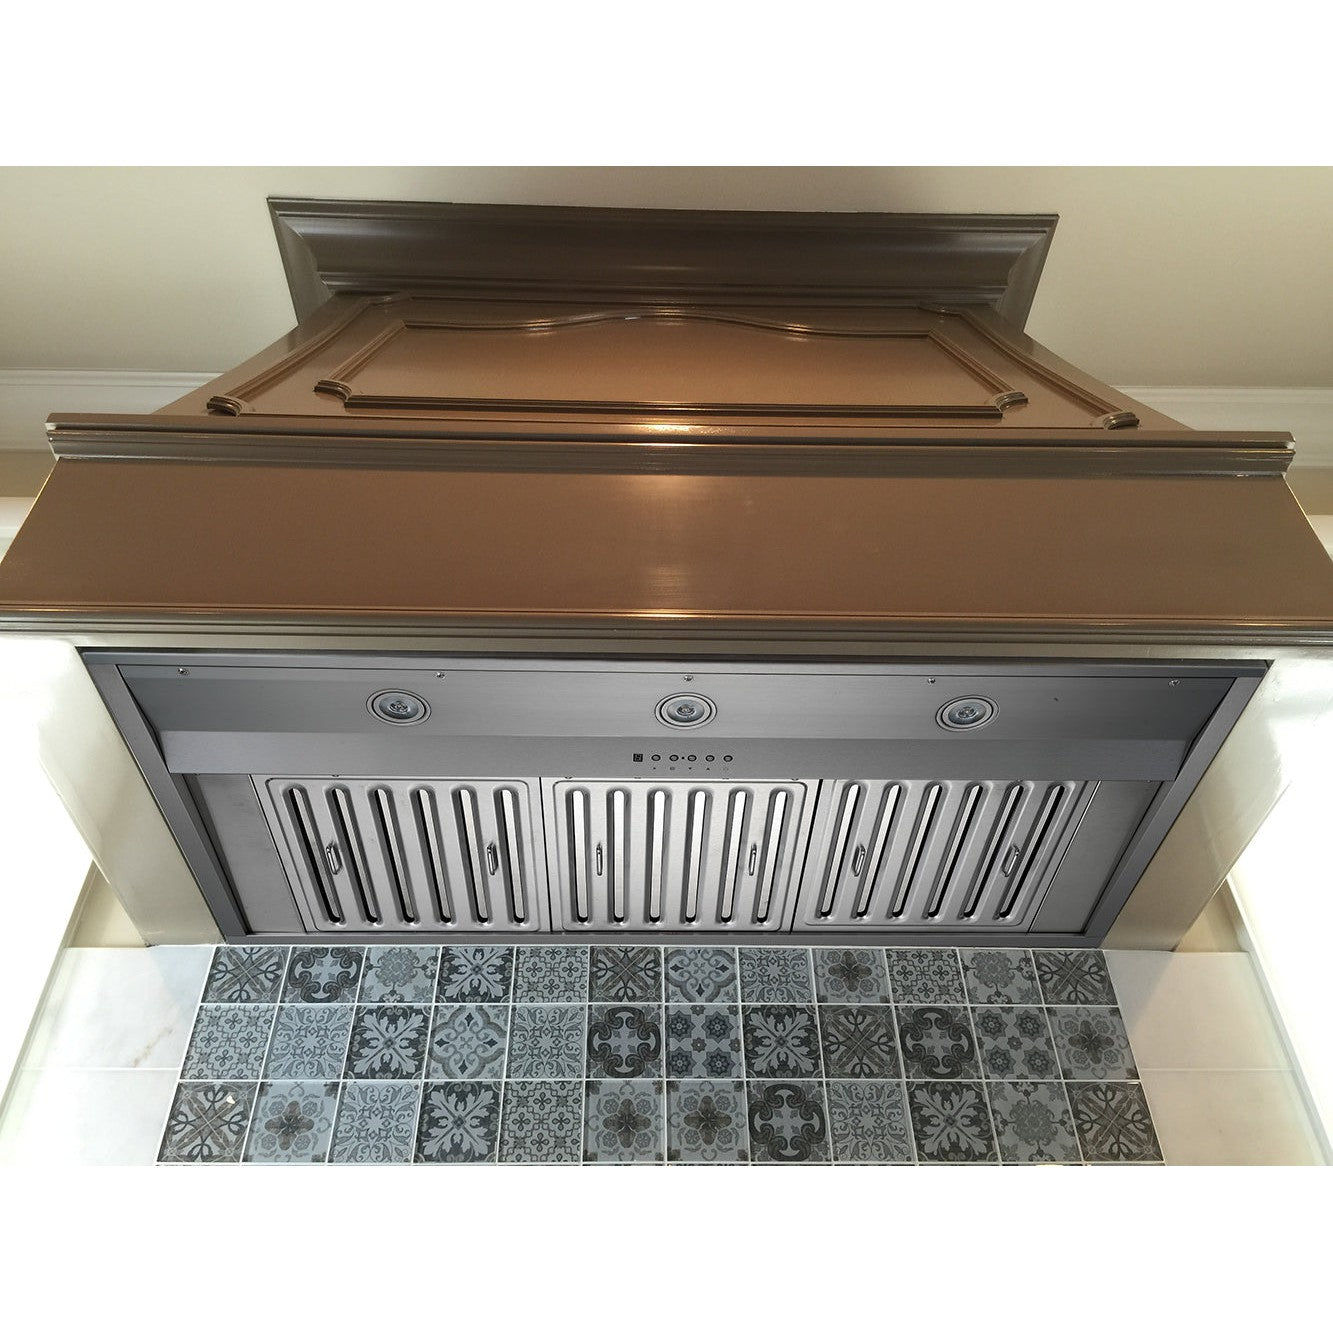 KOBE Premium IN26 SQB-1200-1 Series 48" Insert or Built-in Range Hood With 1200 CFM Internal Blower, 6-Speed Electronic Button Control, Delay Shut Off, and Multi-Level Lighting